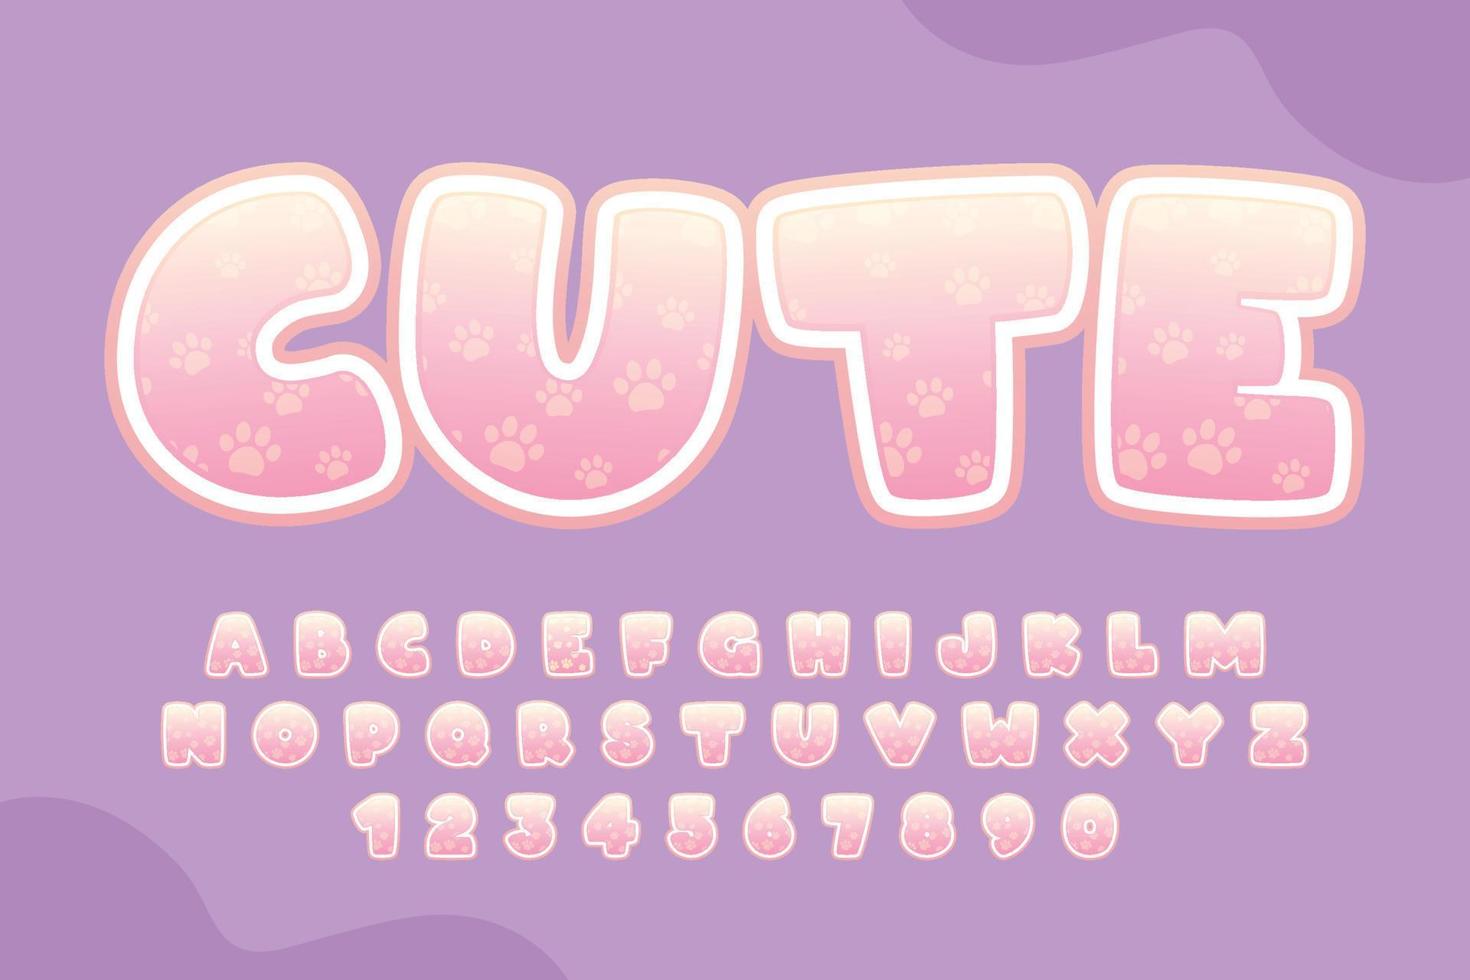 decorative cute Font and Alphabet vector with paw pattern